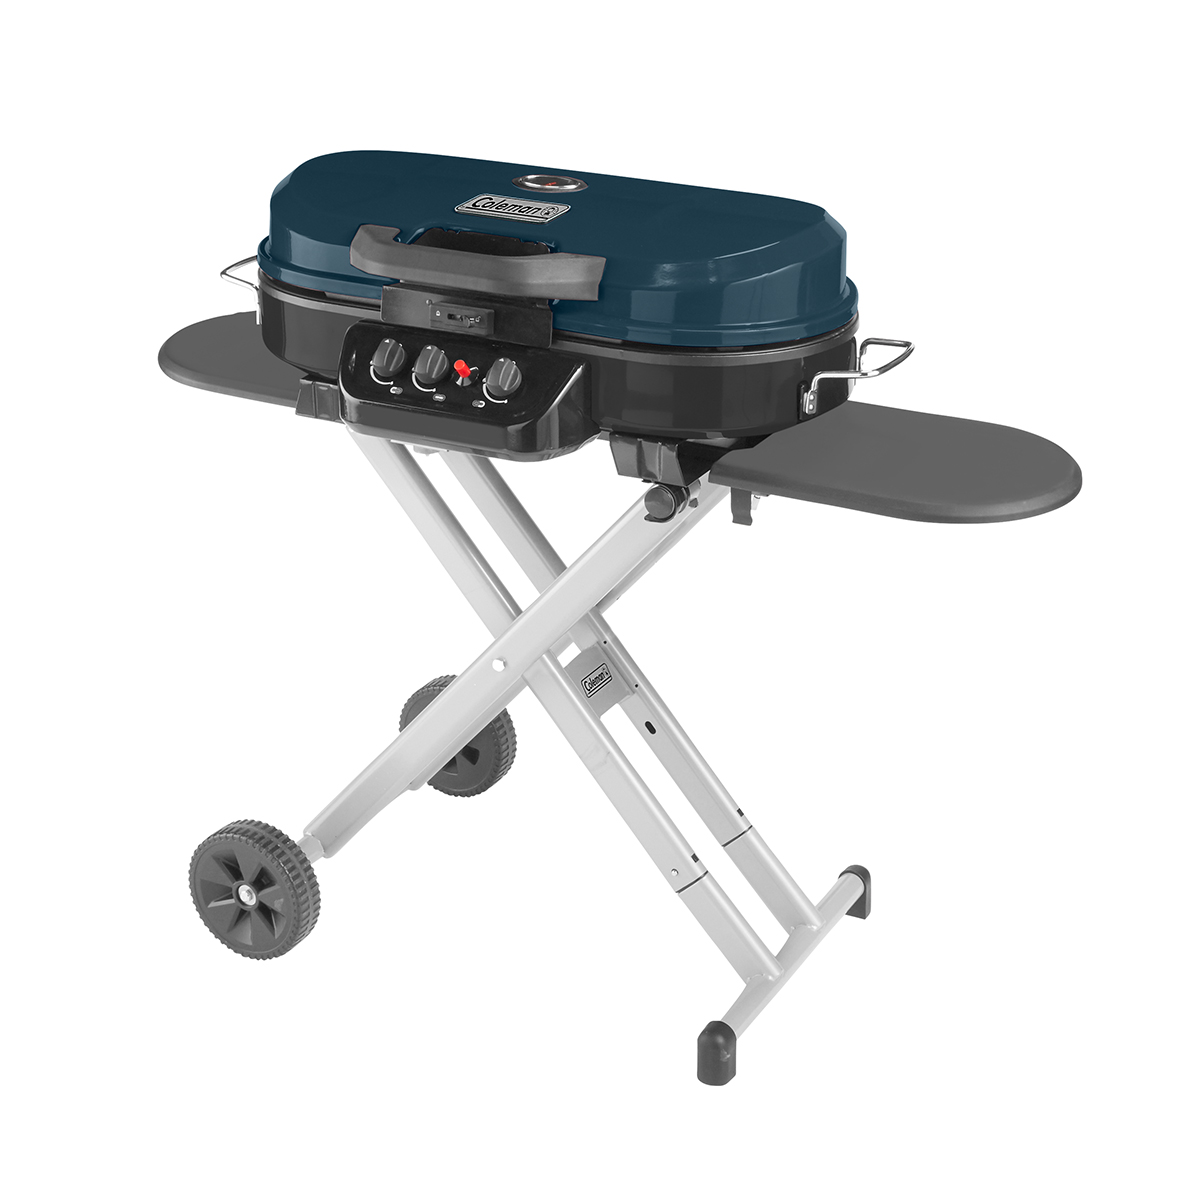 Coleman RoadTrip 285 Standup Propane Gas Grill, Blue - image 1 of 7